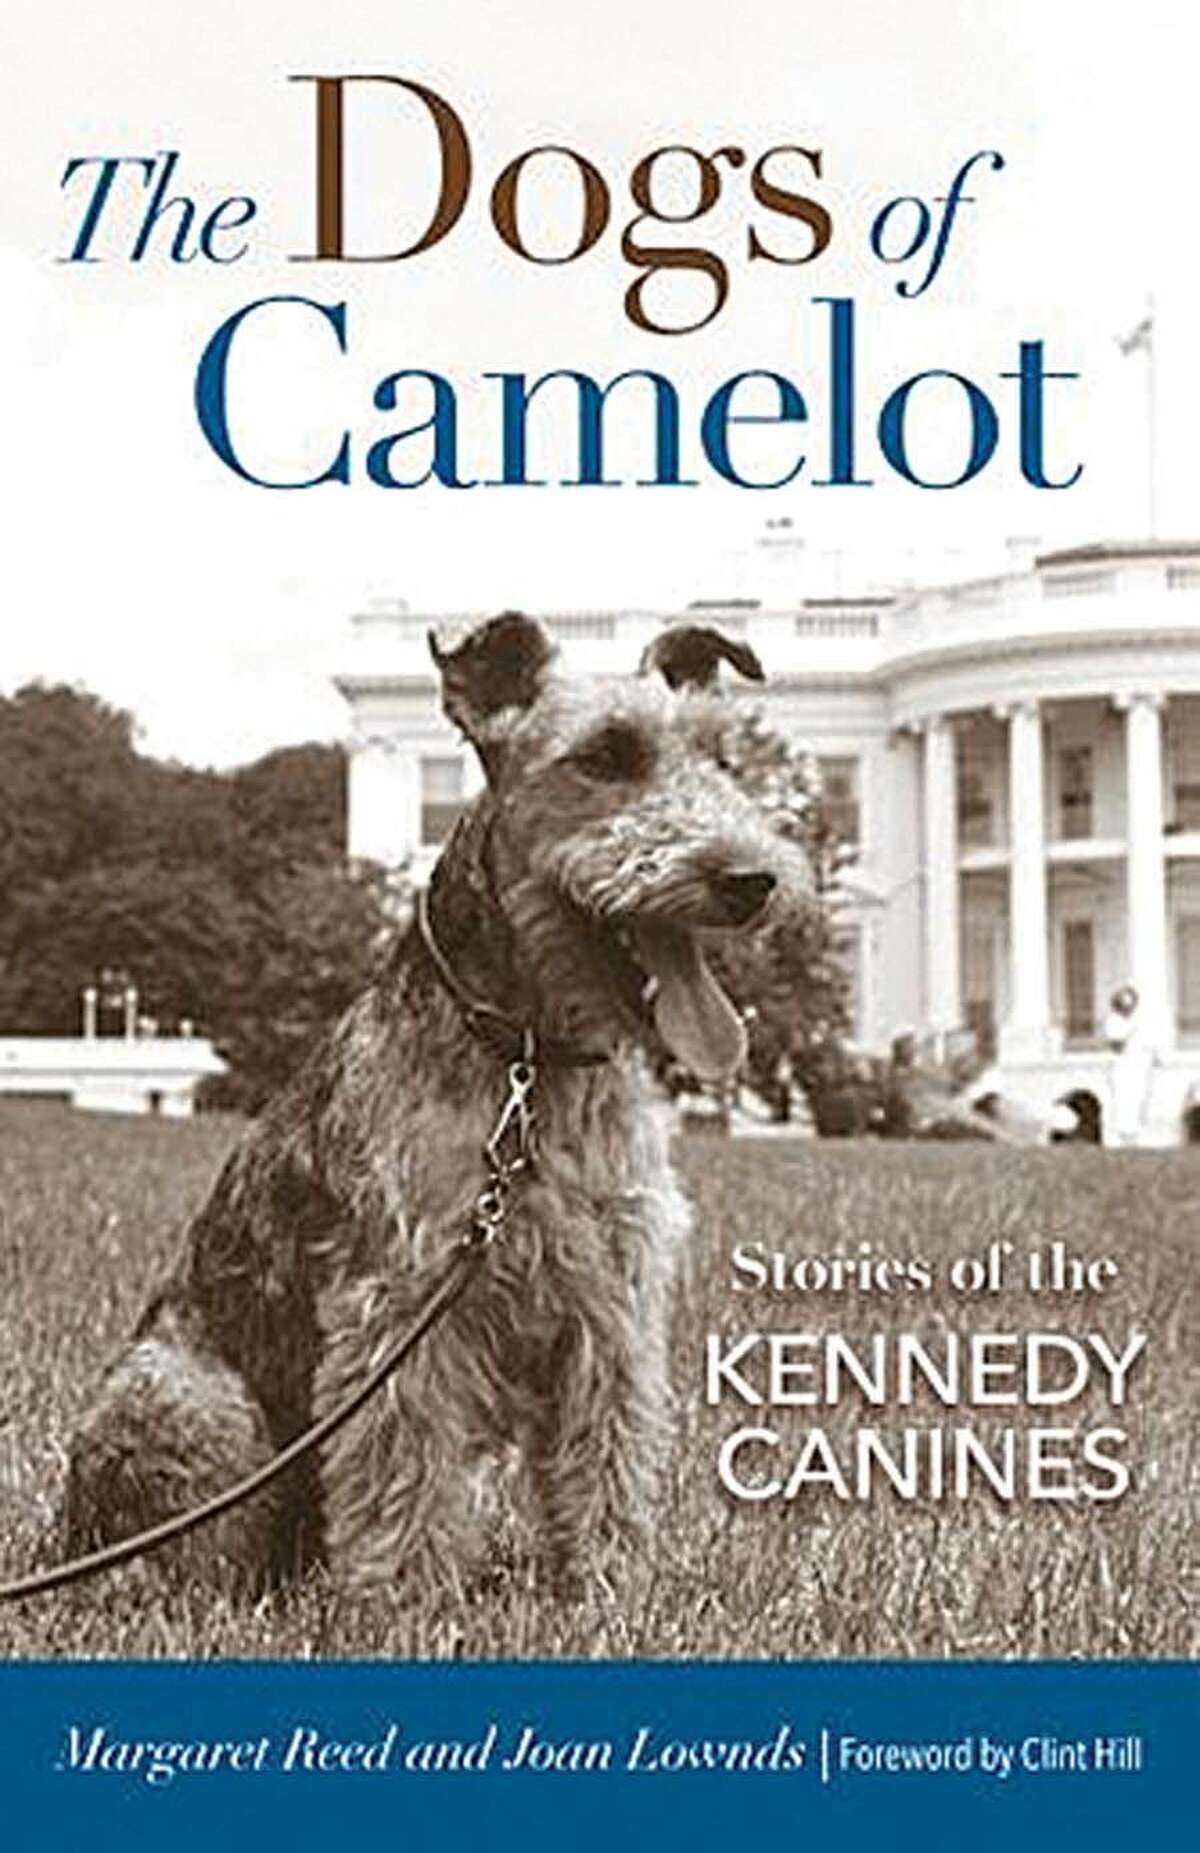 The Dogs of Camelot copy.jpg